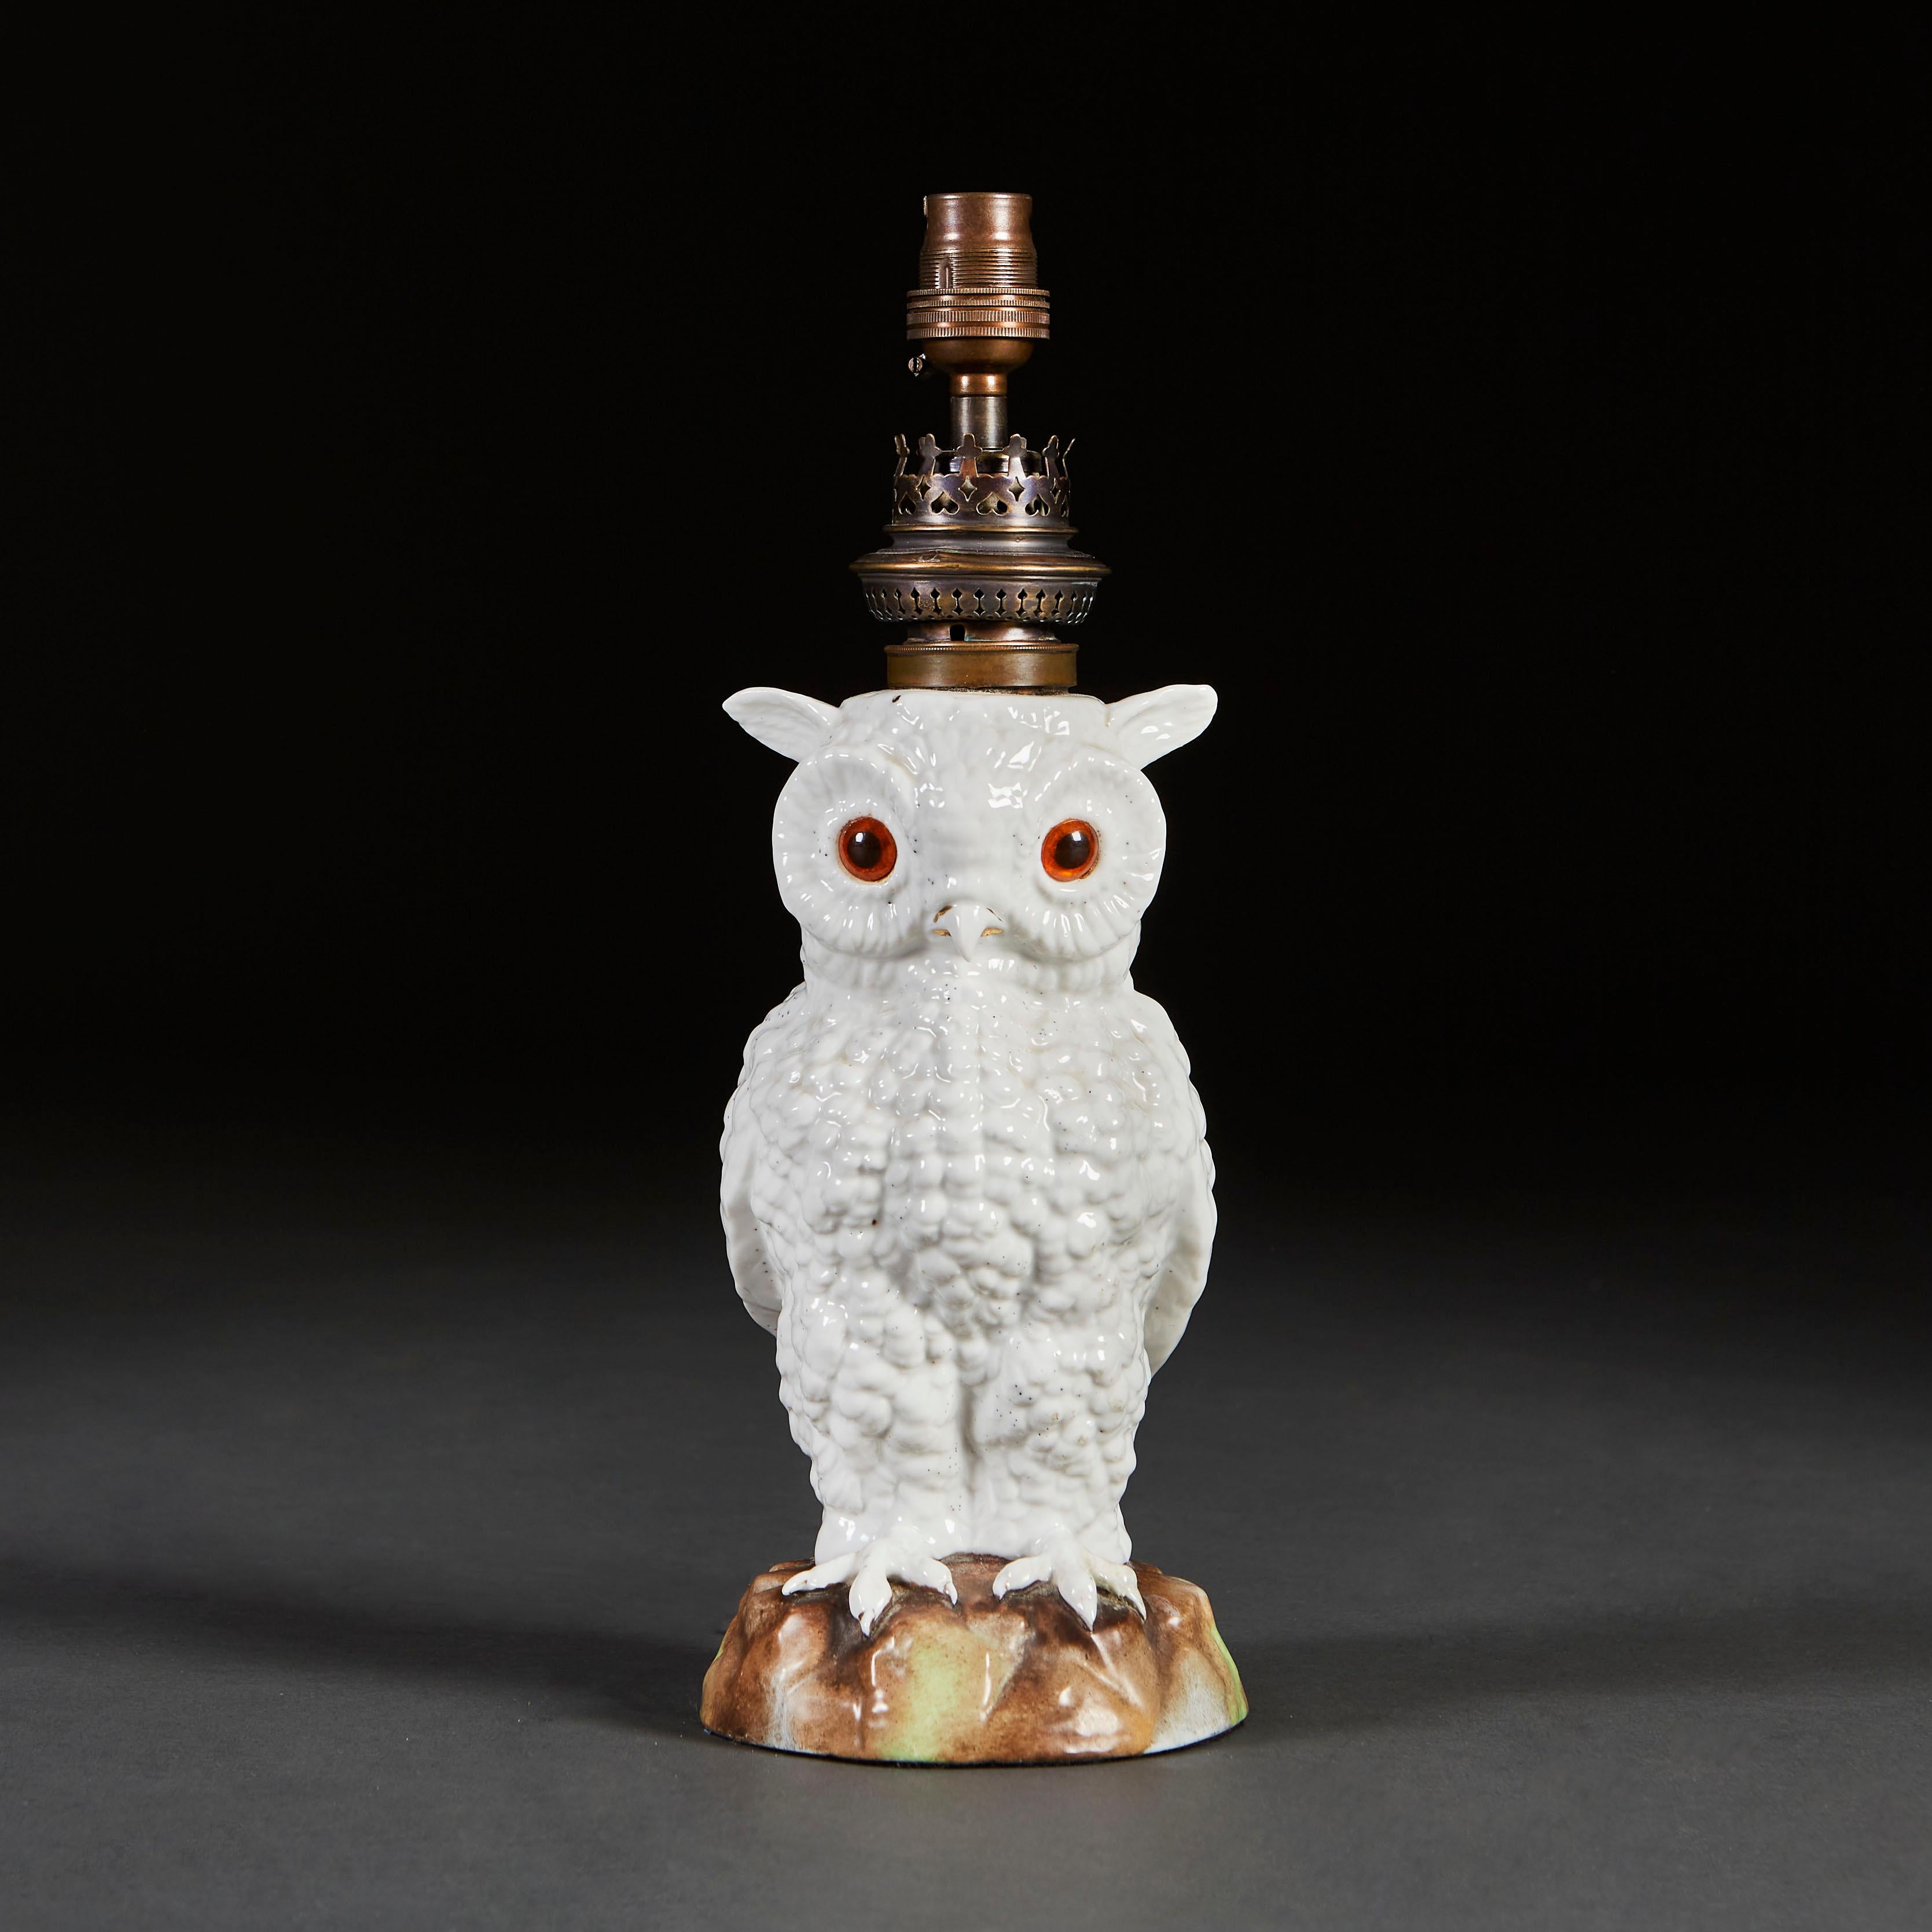 An unusual nineteenth century ceramic lamp in the form of an owl, modelled realistically perched on a rock, with wings folded behind, the owl with white glaze and glass bead eyes inset.